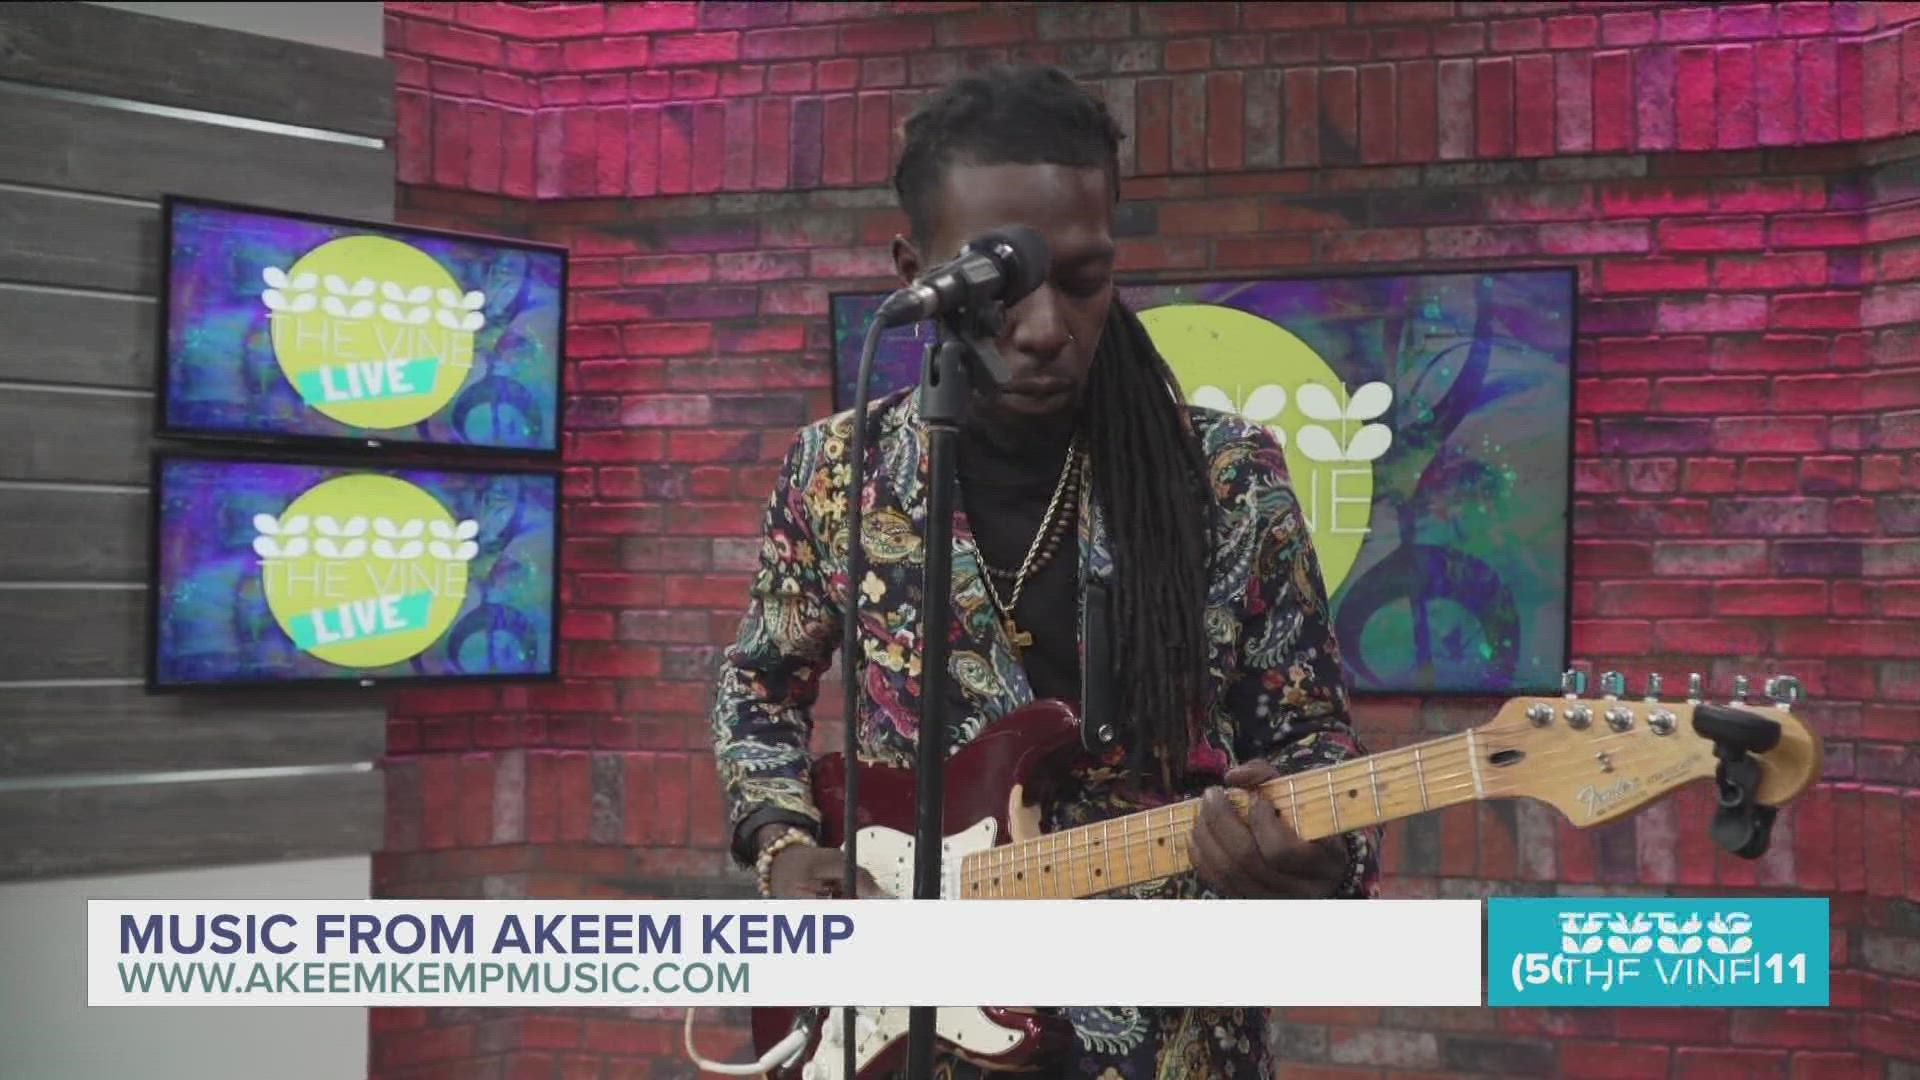 Learn more about Akeem at www.akeemkempmusic.com